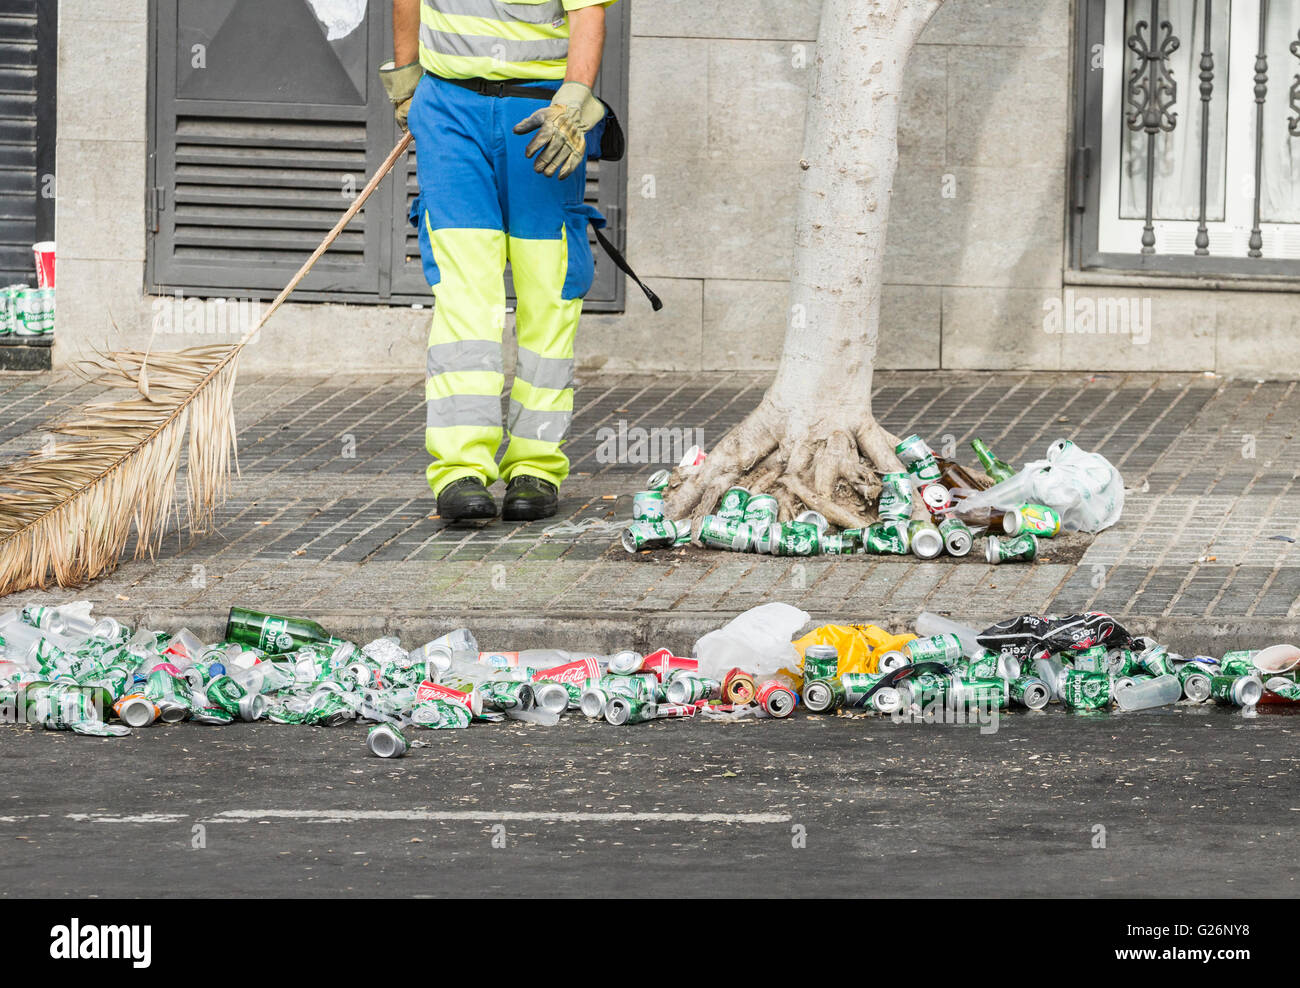 council-worker-cleaning-up-beer-cans-and-plastic-cups-using-palm-tree-G26NY8.jpg